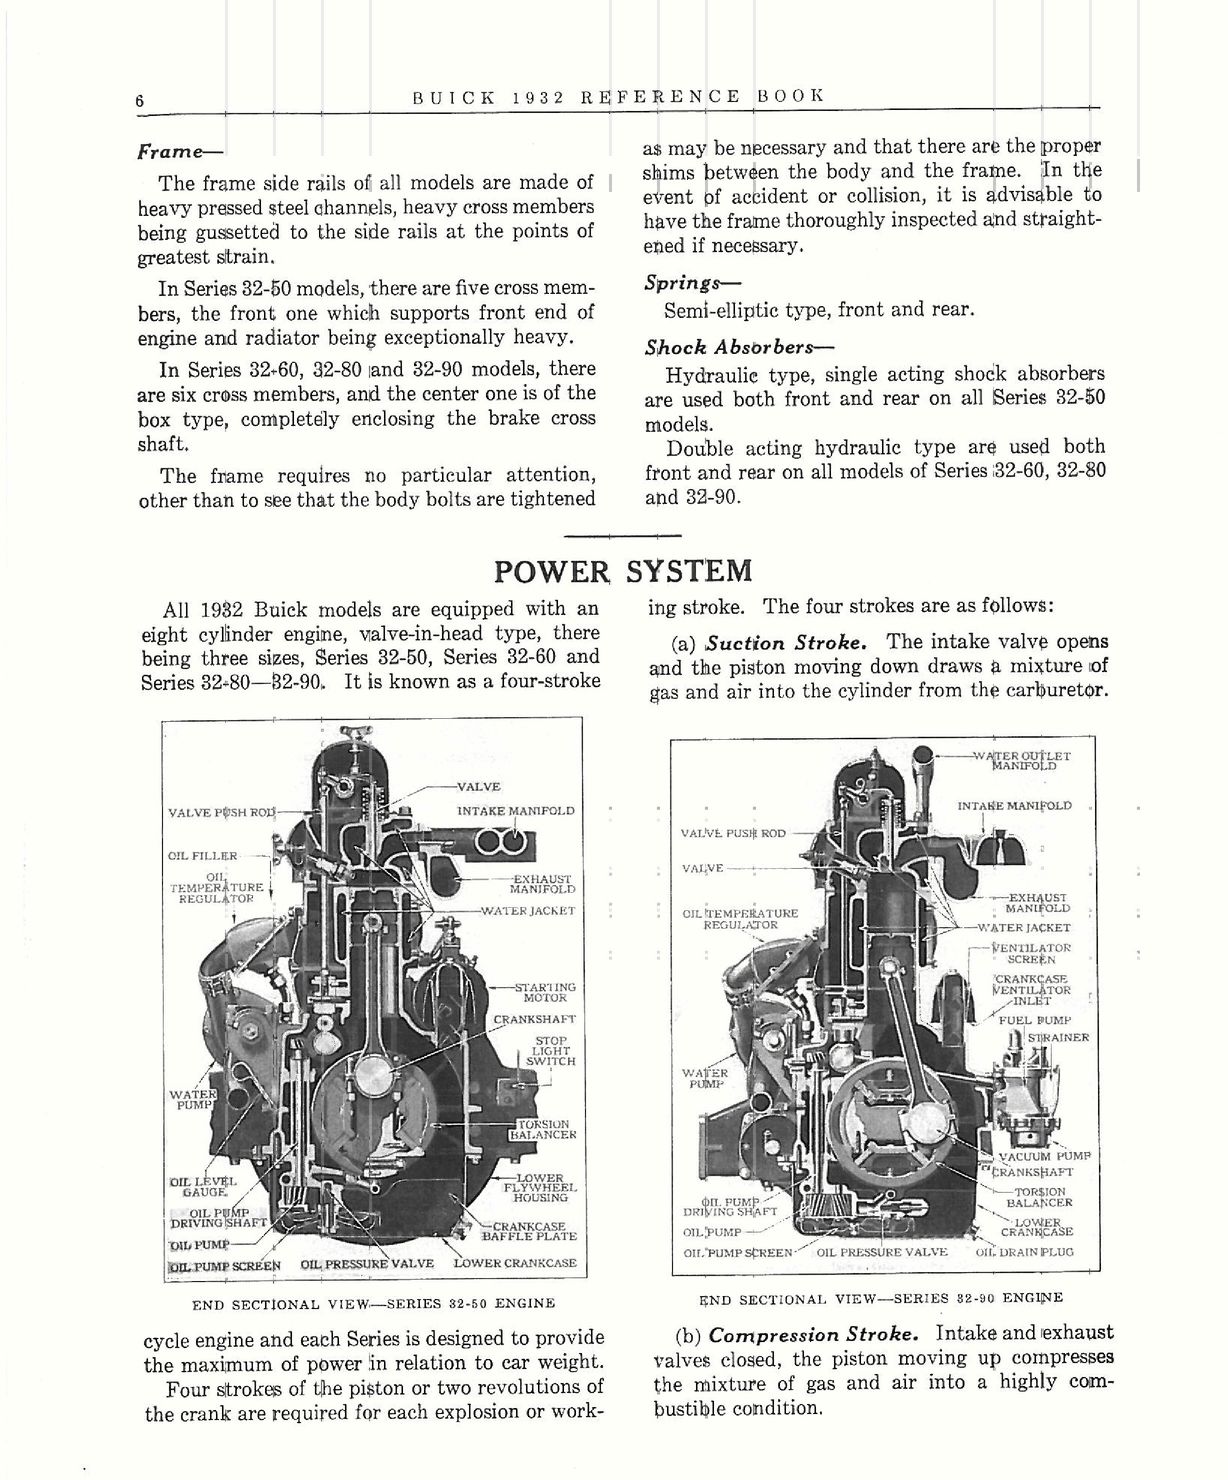 n_1932 Buick Reference Book-06.jpg